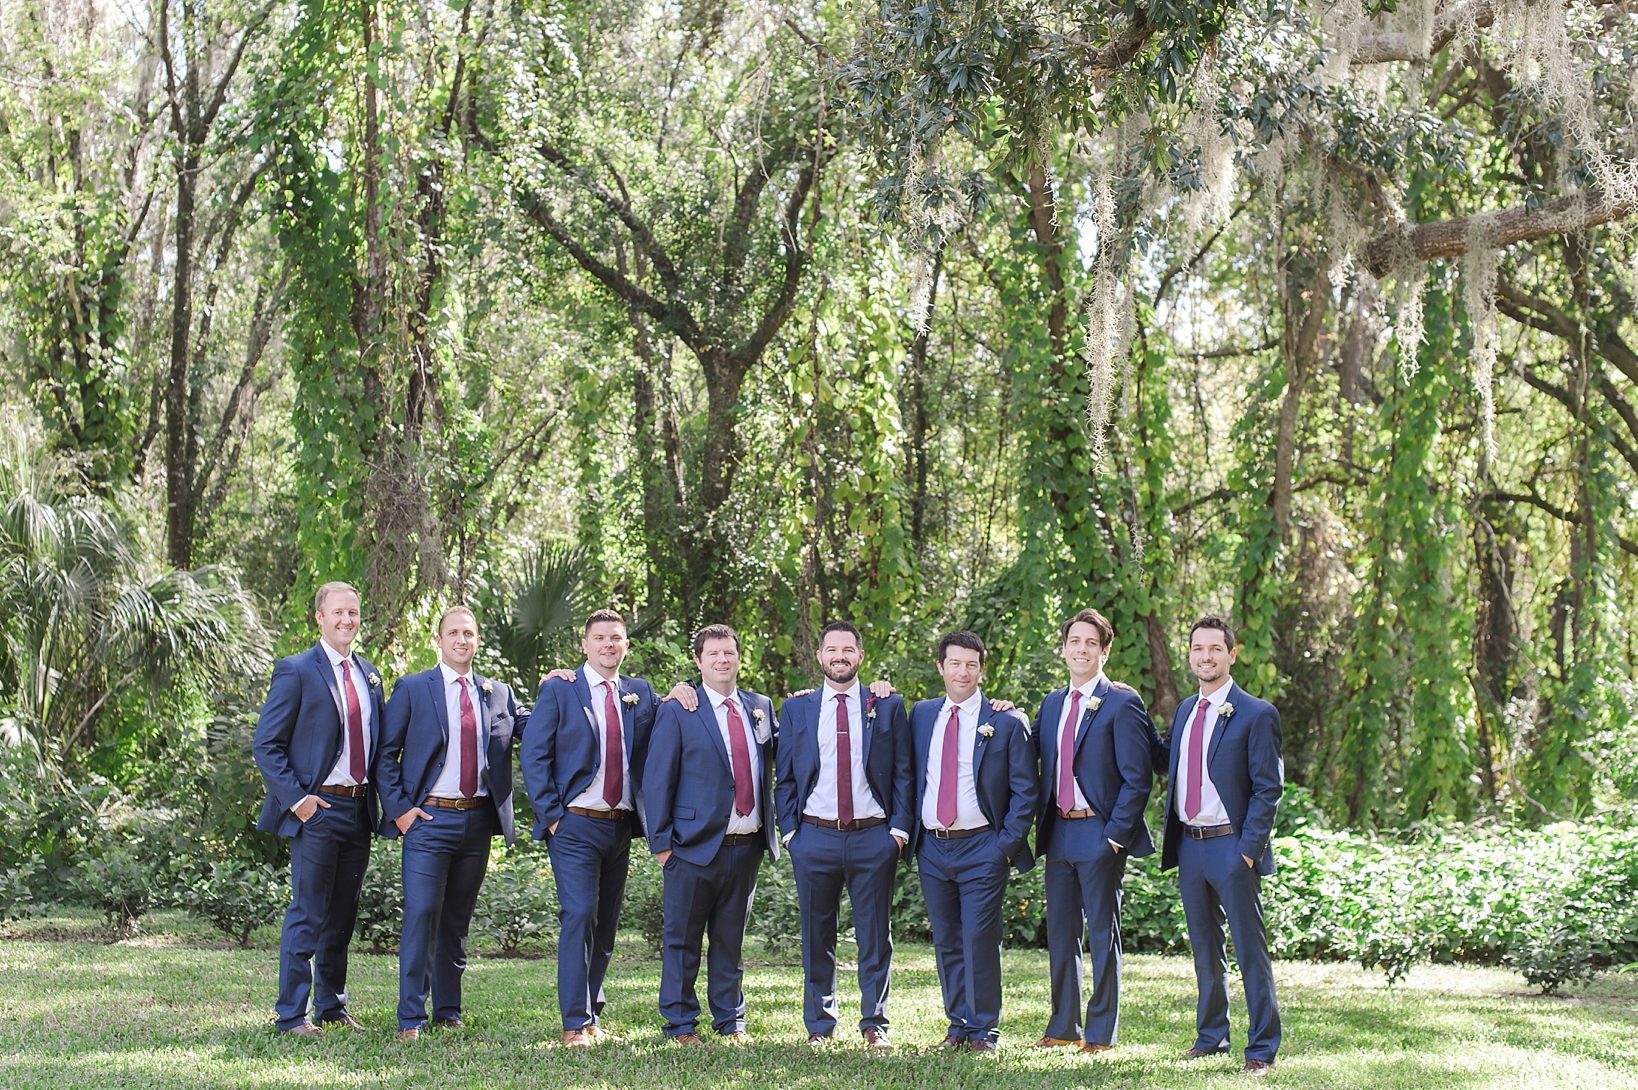 The Groom and his Groomsmen pose surrounded by greenery at Bakers Ranch